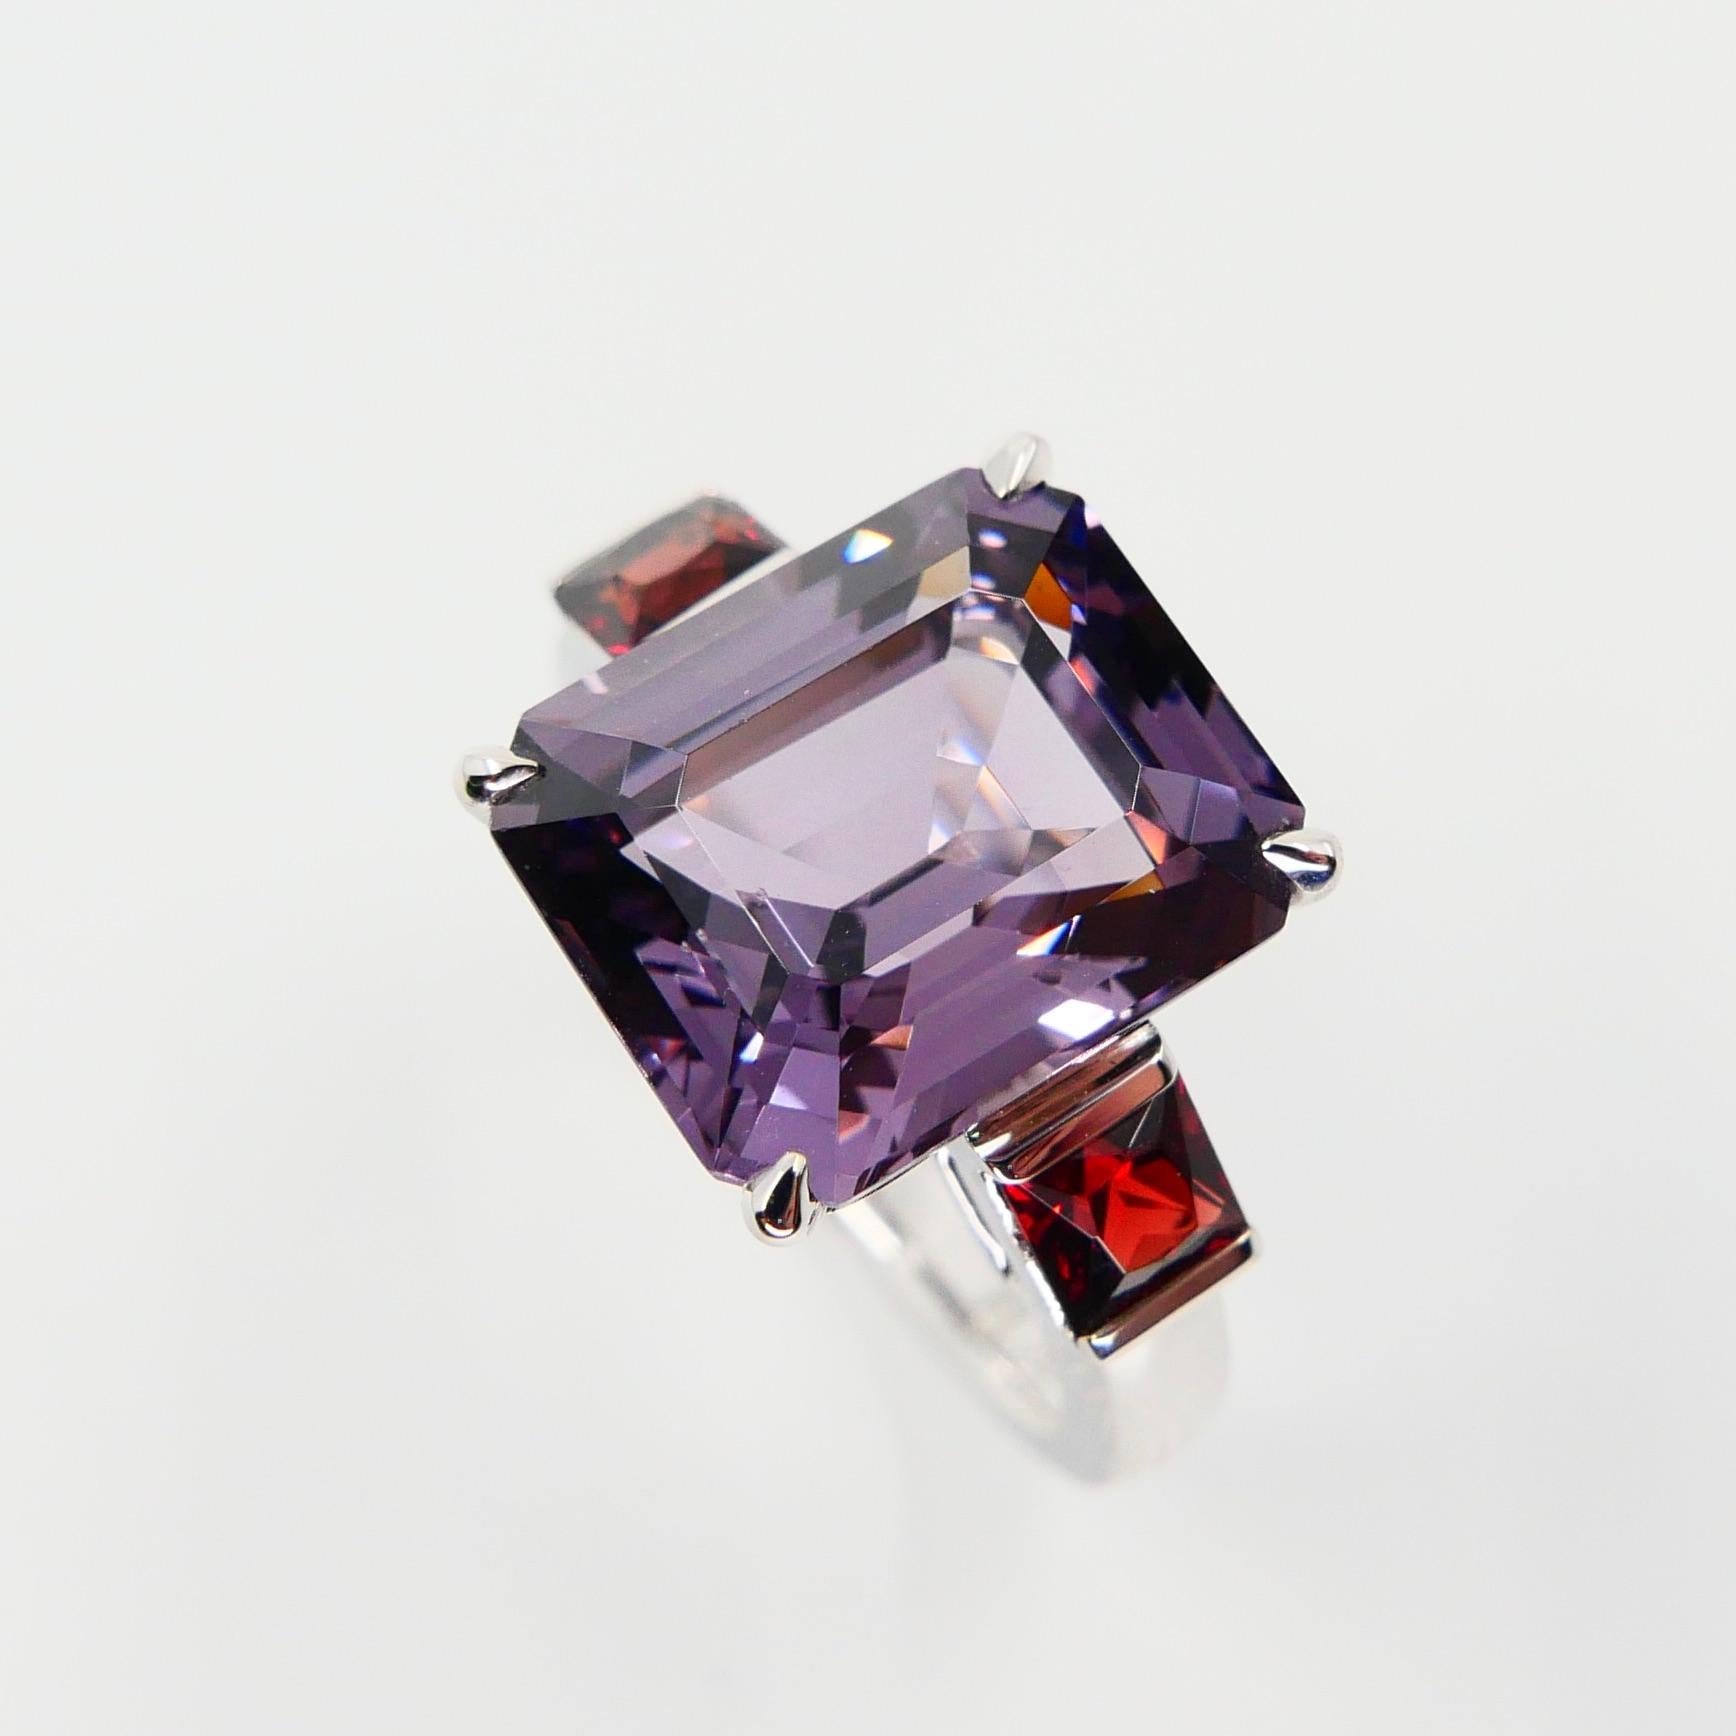 Natural 7.77 Cts Purple Spinel & 0.83 Carat Red Spinel Three-Stone Cocktail Ring 5